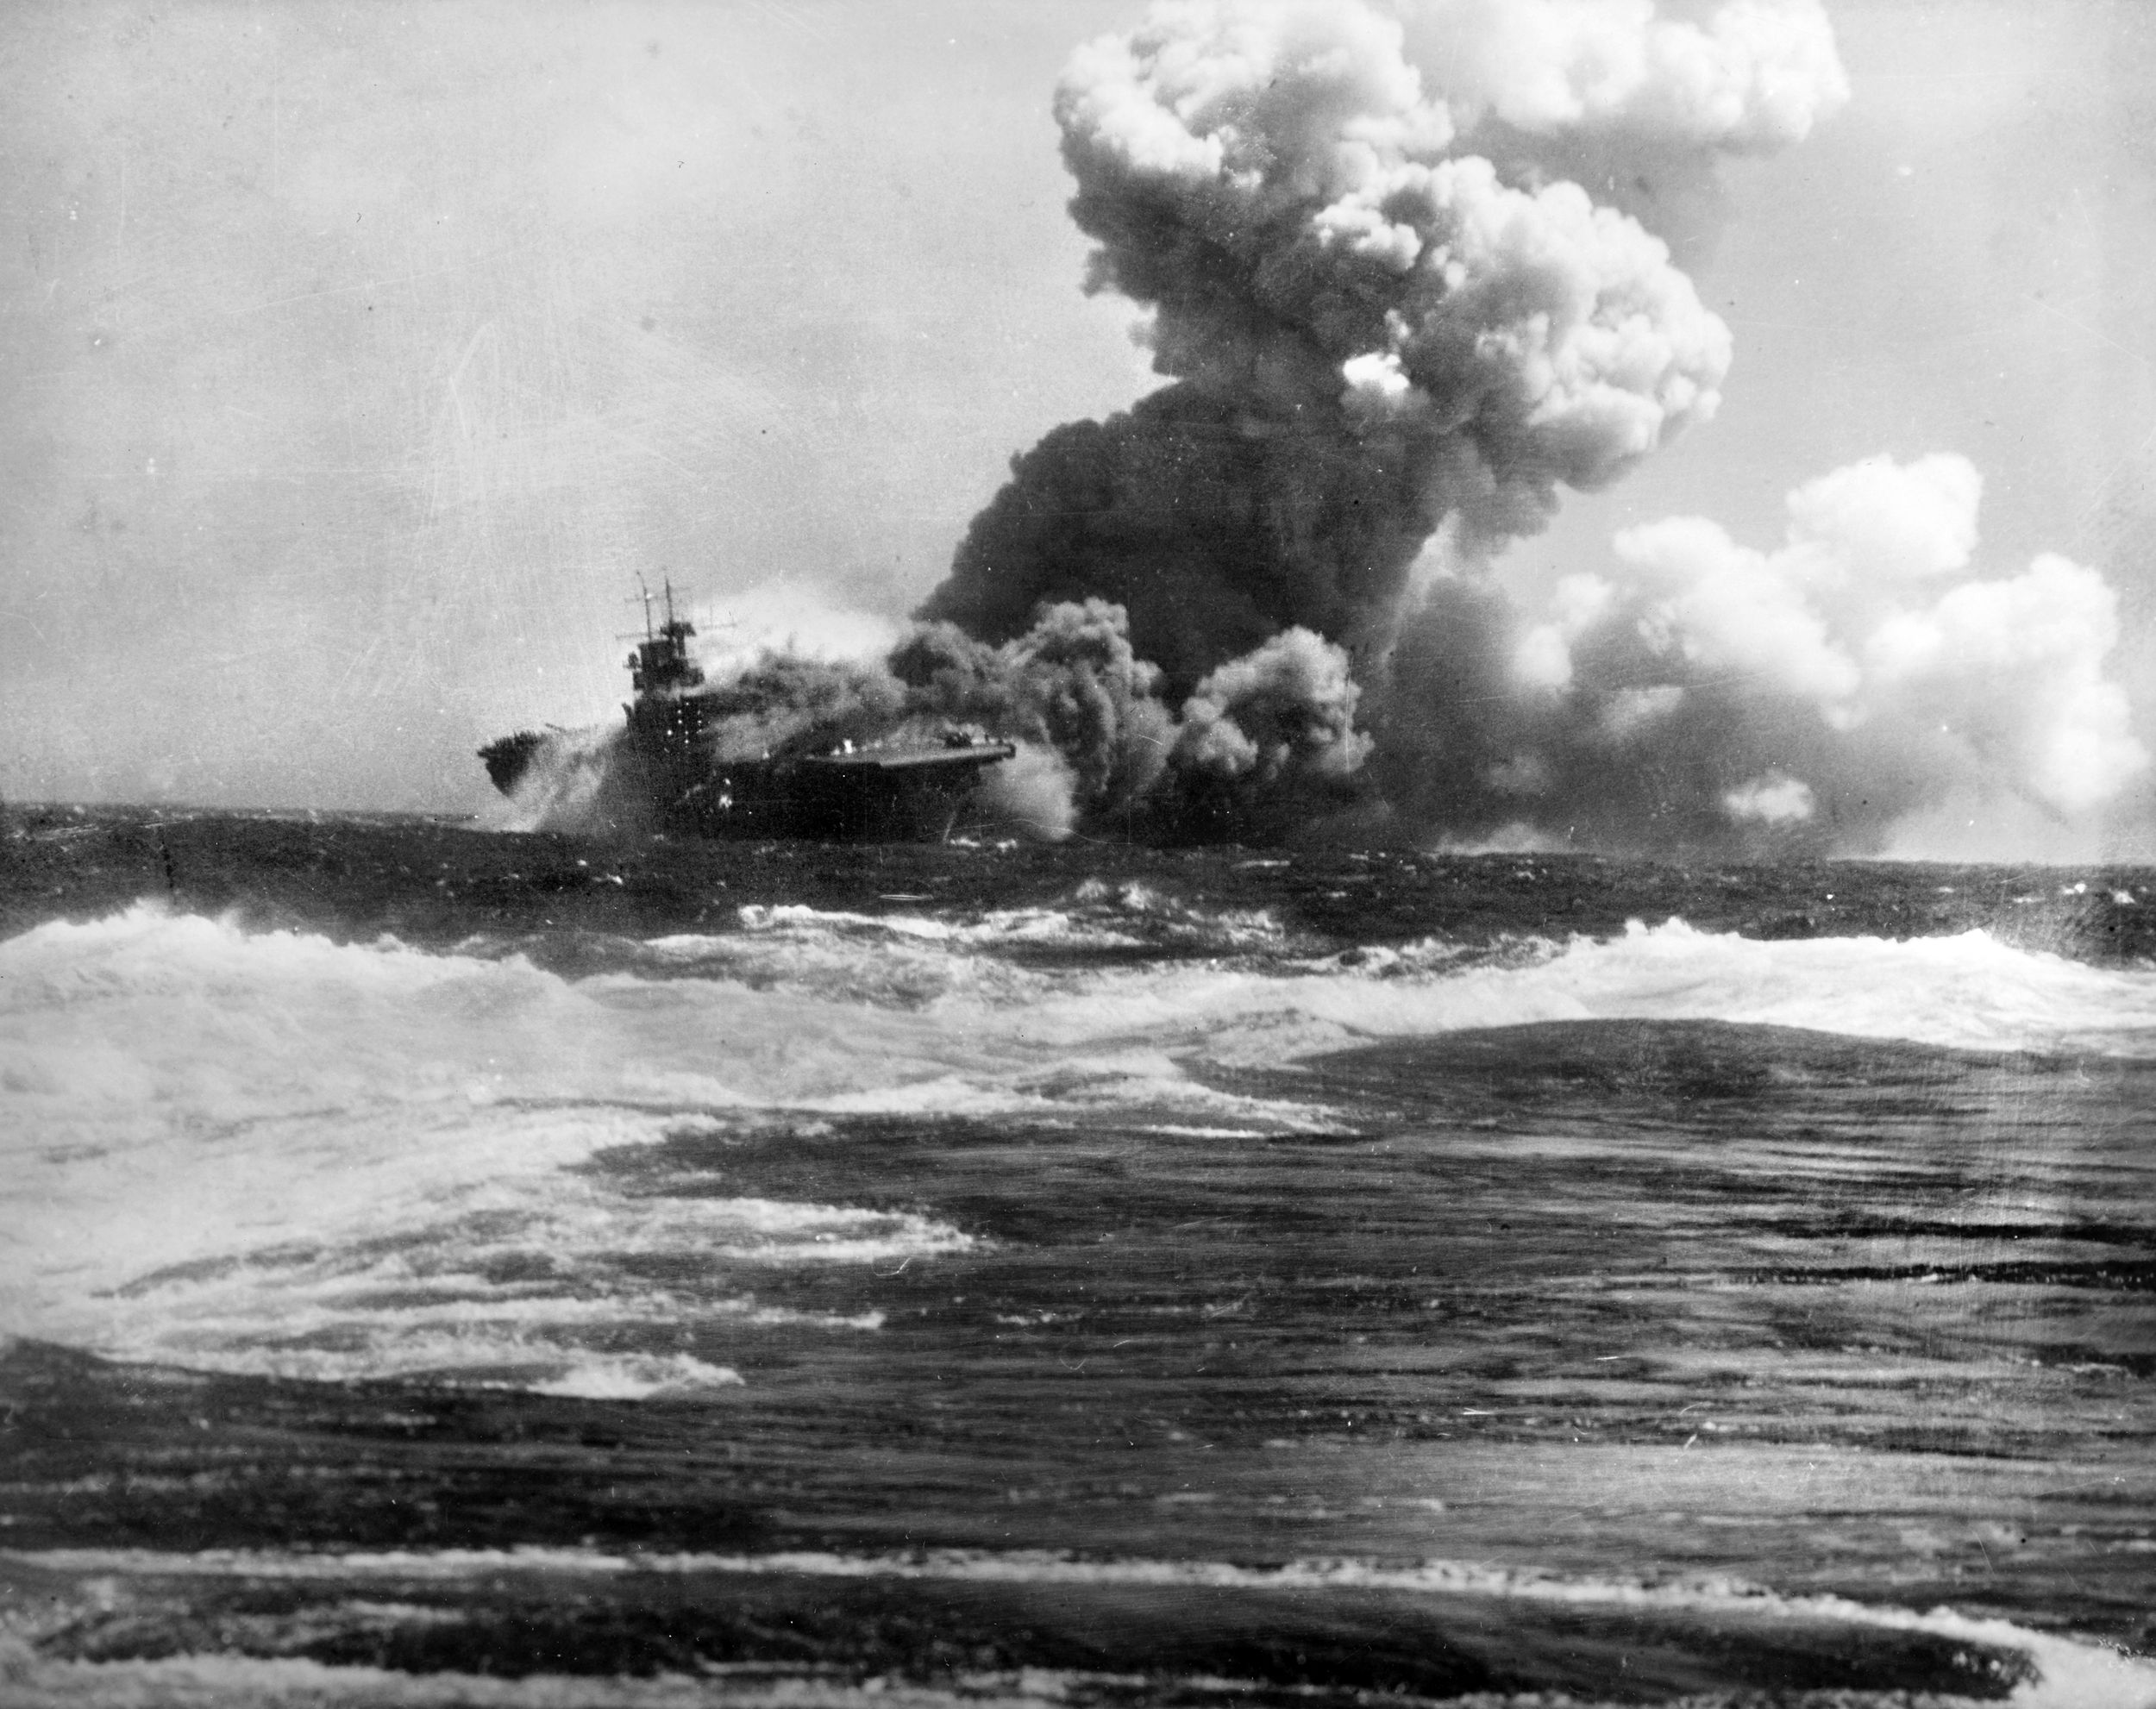 When the I-19 sank the USS Wasp on September 15, 1942, 193 sailors were killed or went missing; 367 were wounded. After striking two more ships that day with her torpedoes, the submarine sub- merged below the burning Wasp as depth charges began falling.